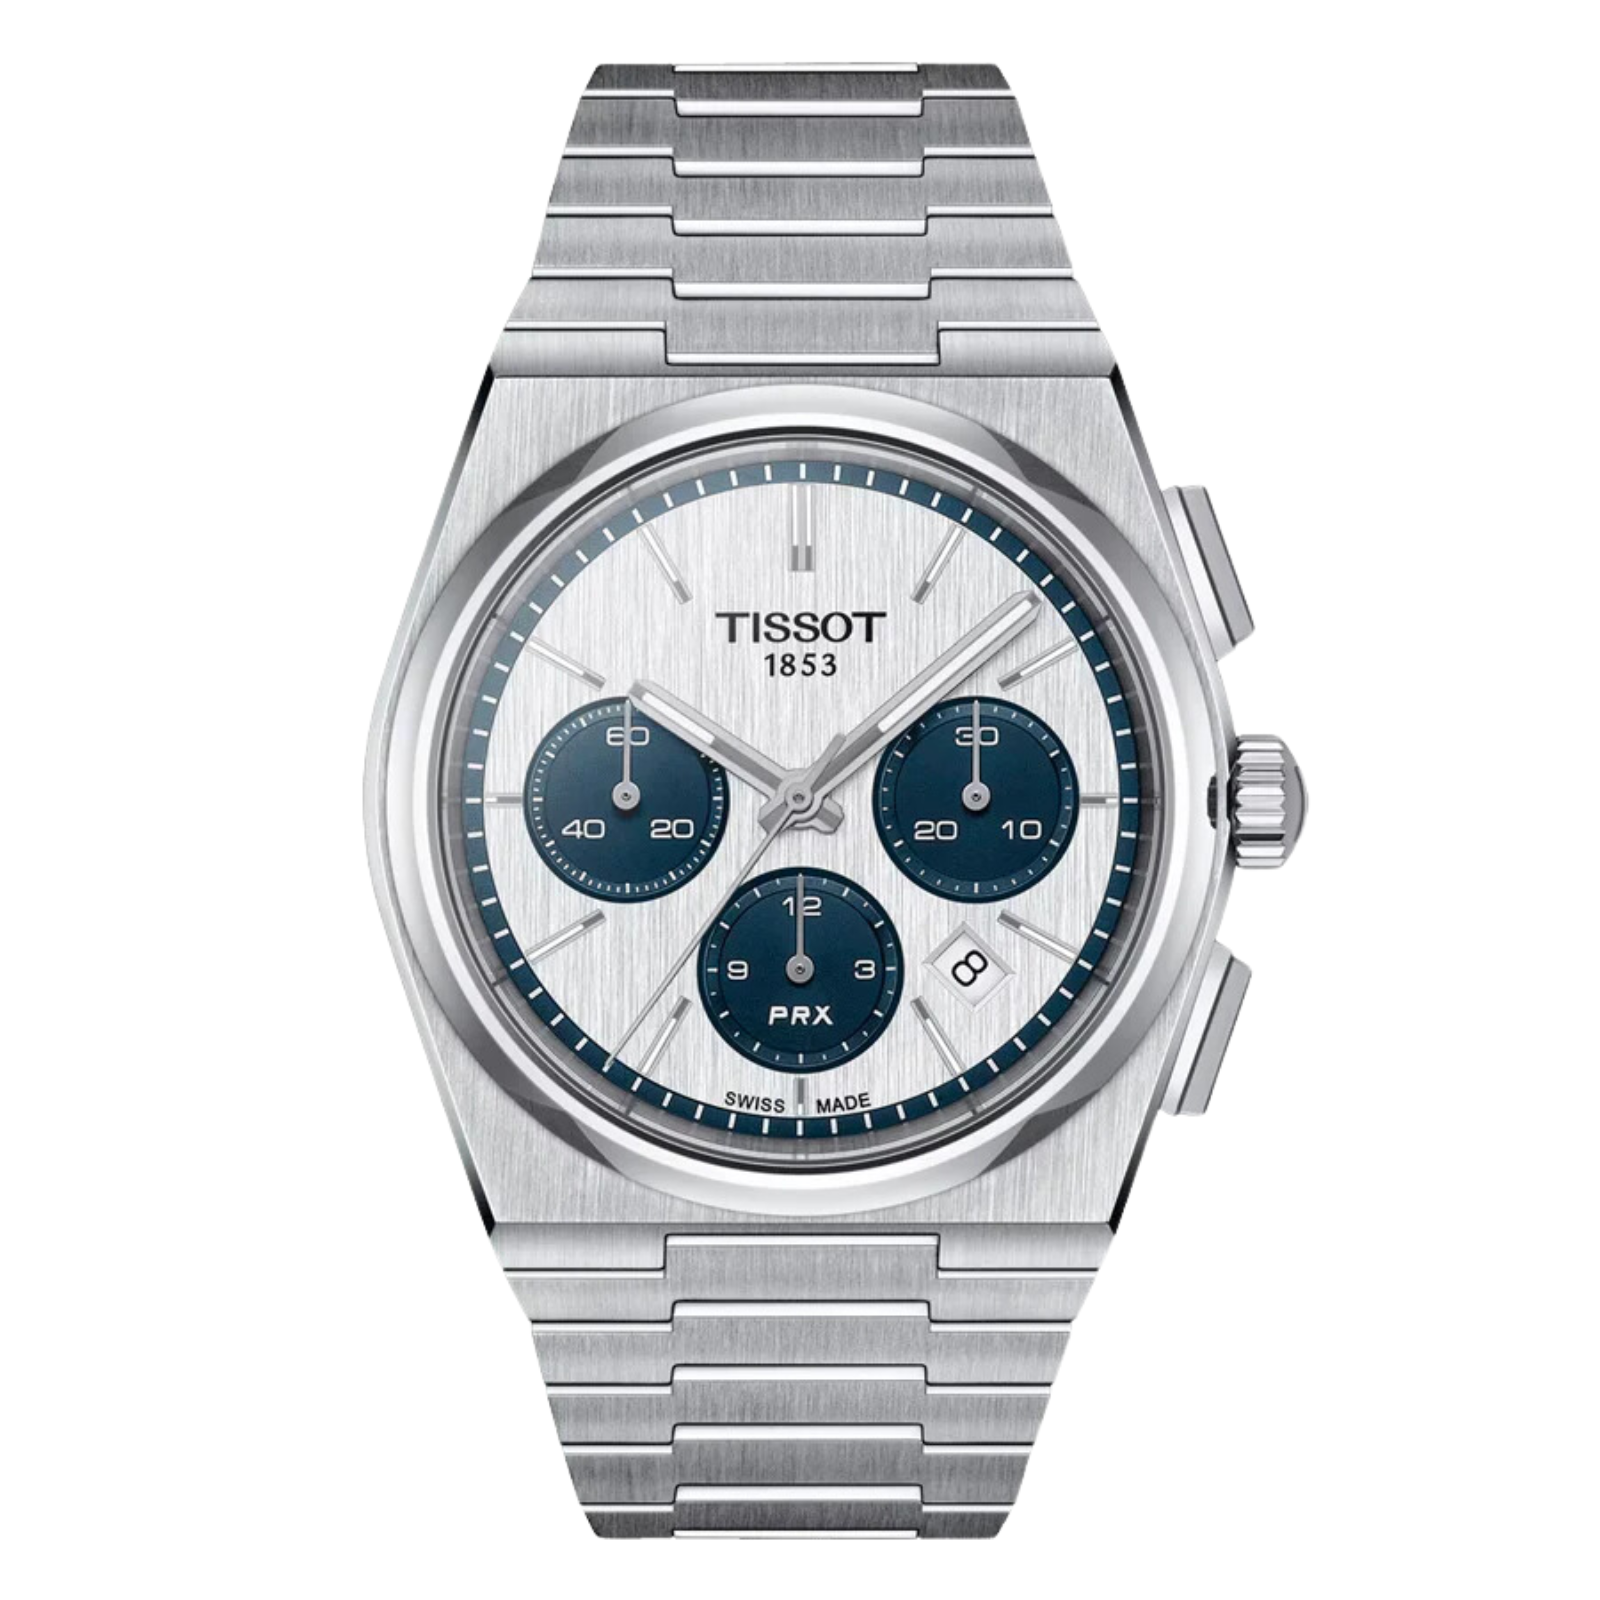 Tissot 1853 PRX T137.427.11.011.01 T1374271101101 Chronograph Automatic White Dial Watch - Skywatches